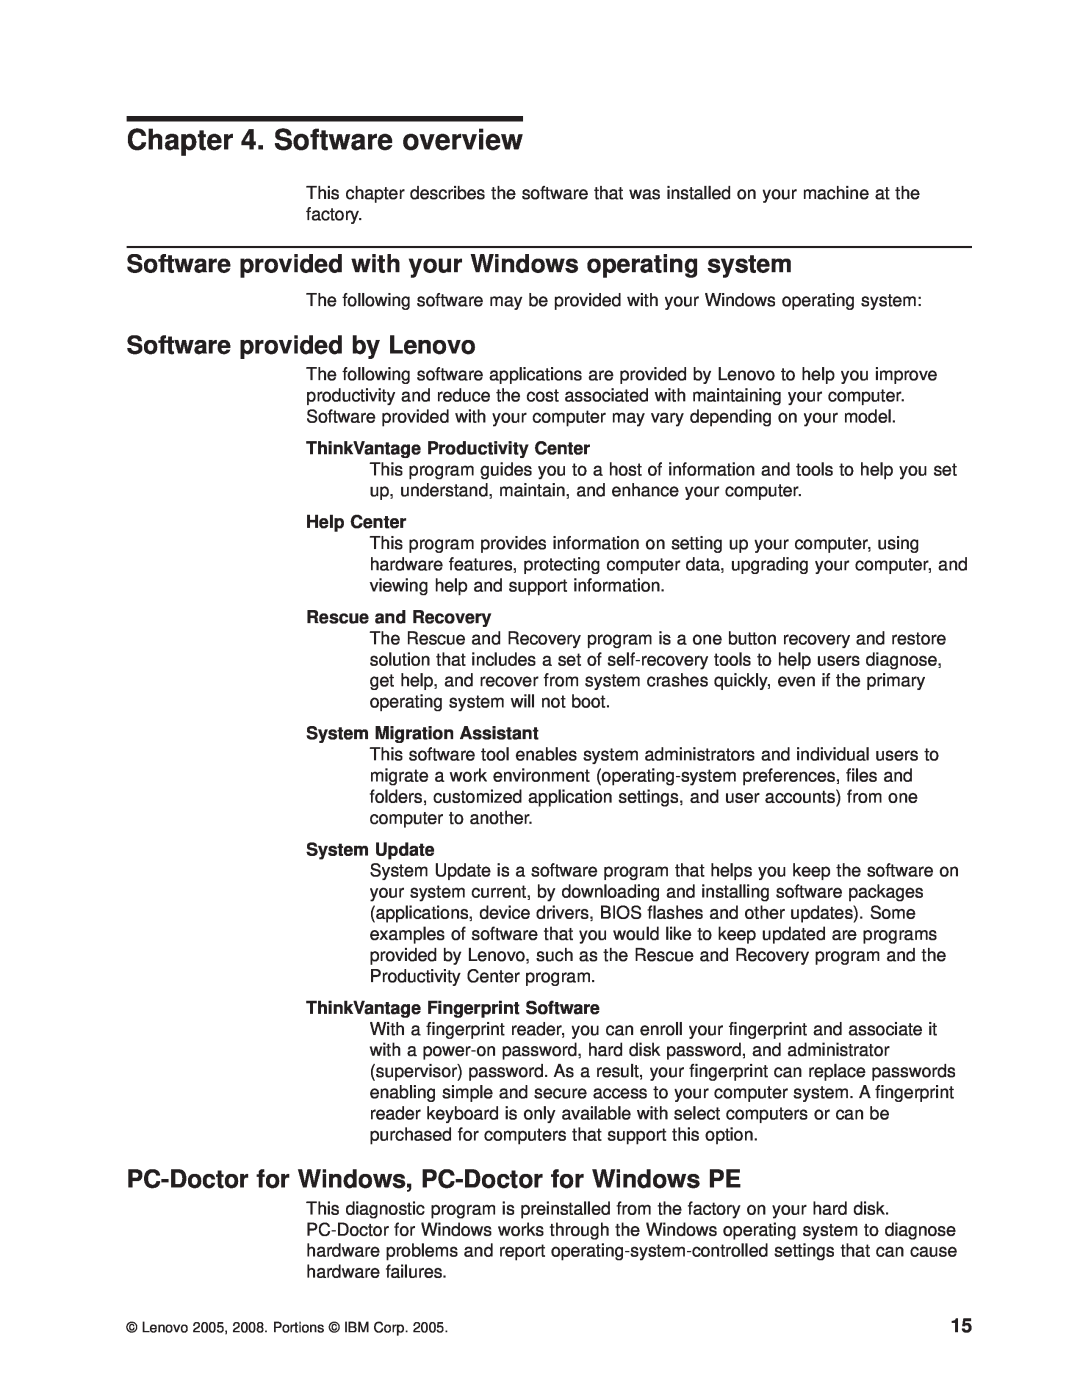 Lenovo 6397 Software overview, Software provided by Lenovo, PC-Doctorfor Windows, PC-Doctorfor Windows PE, Help Center 